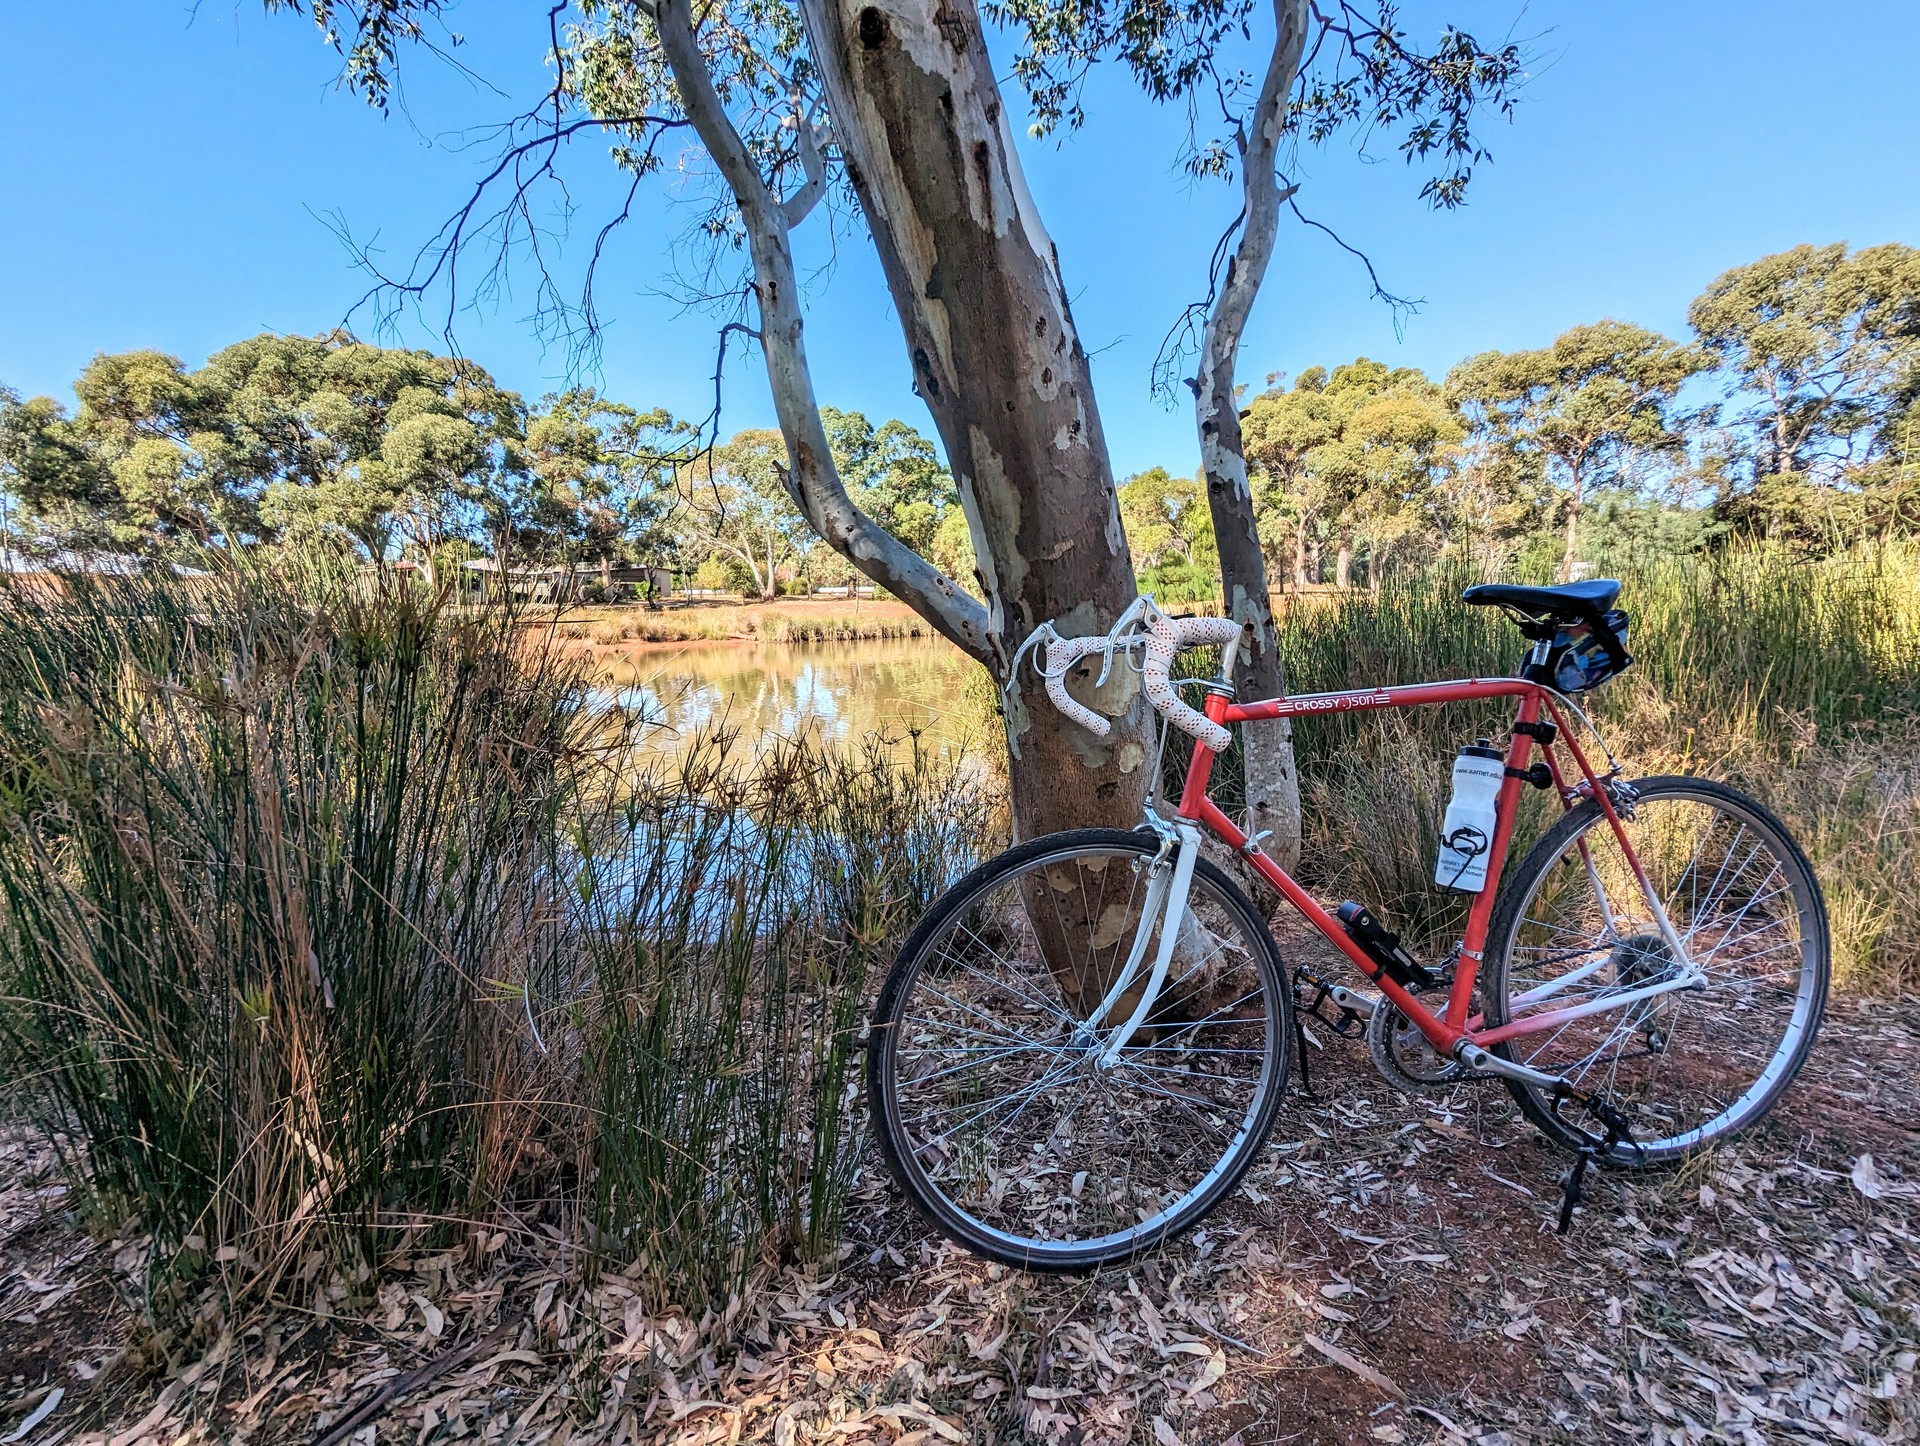 Finished bike leaning against tree with a view of a small lake